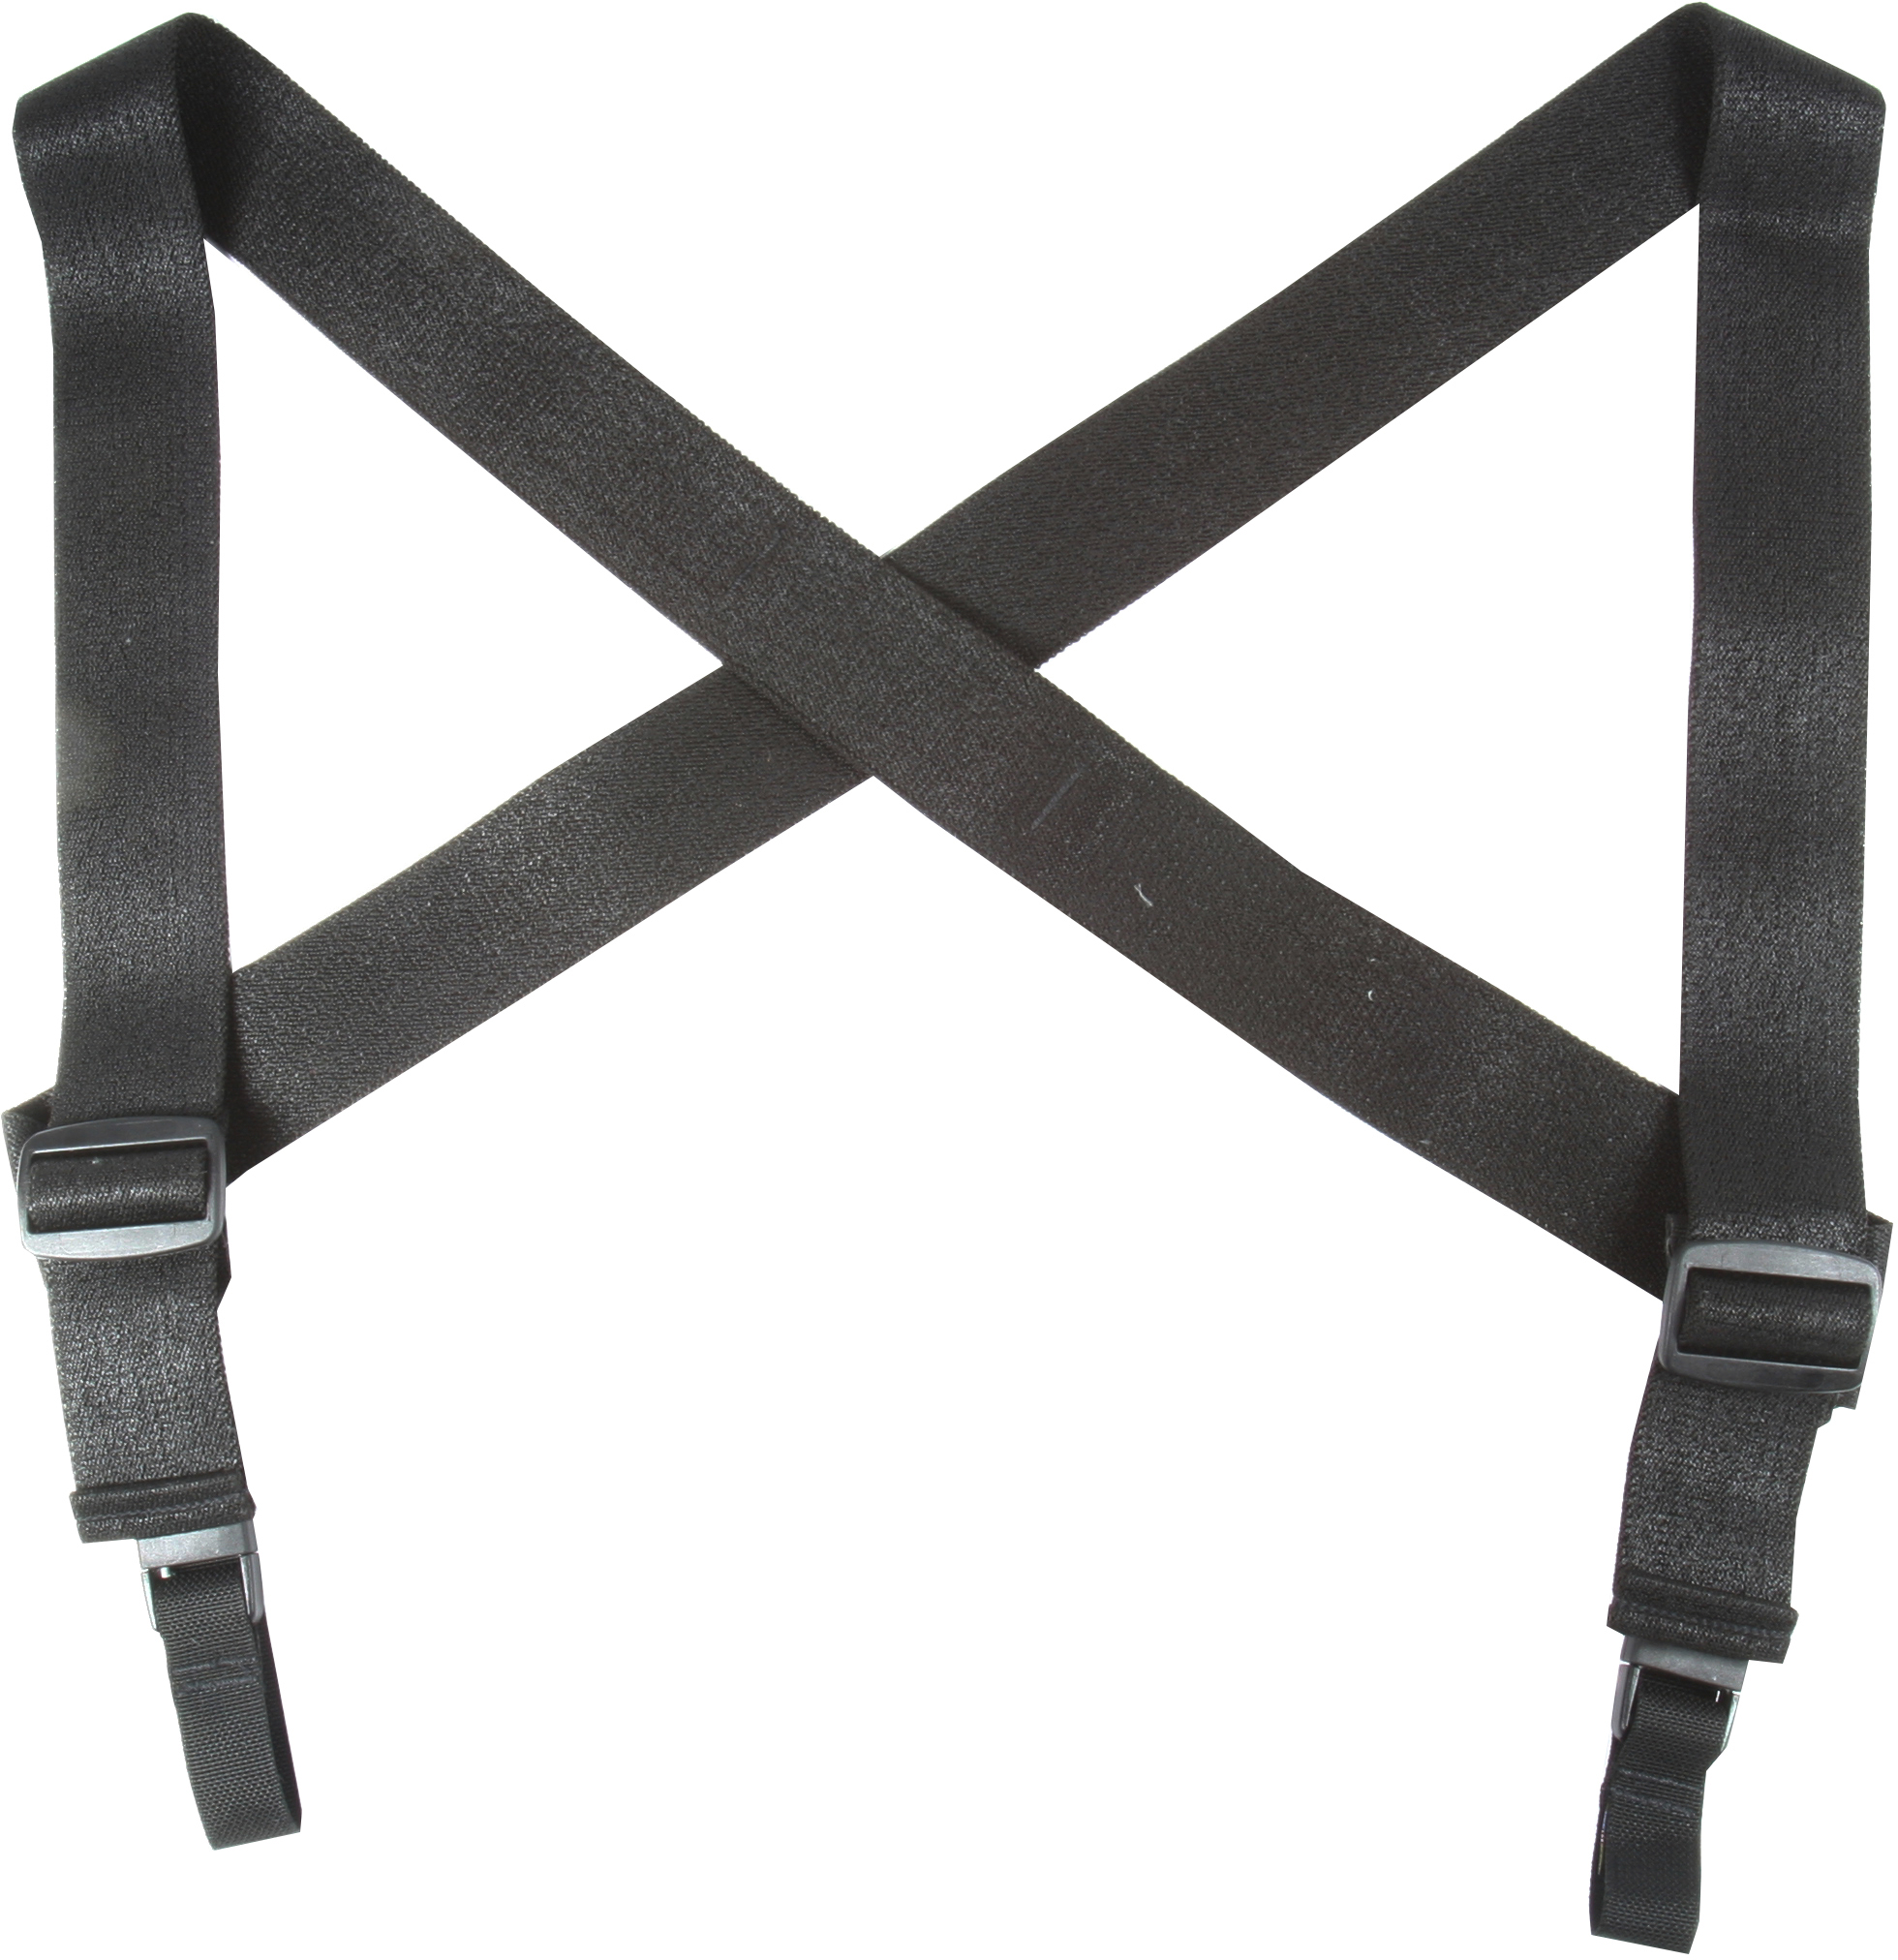 Spec Ops Combat Suspenders  Up to 11% Off 4.9 Star Rating w/ Free